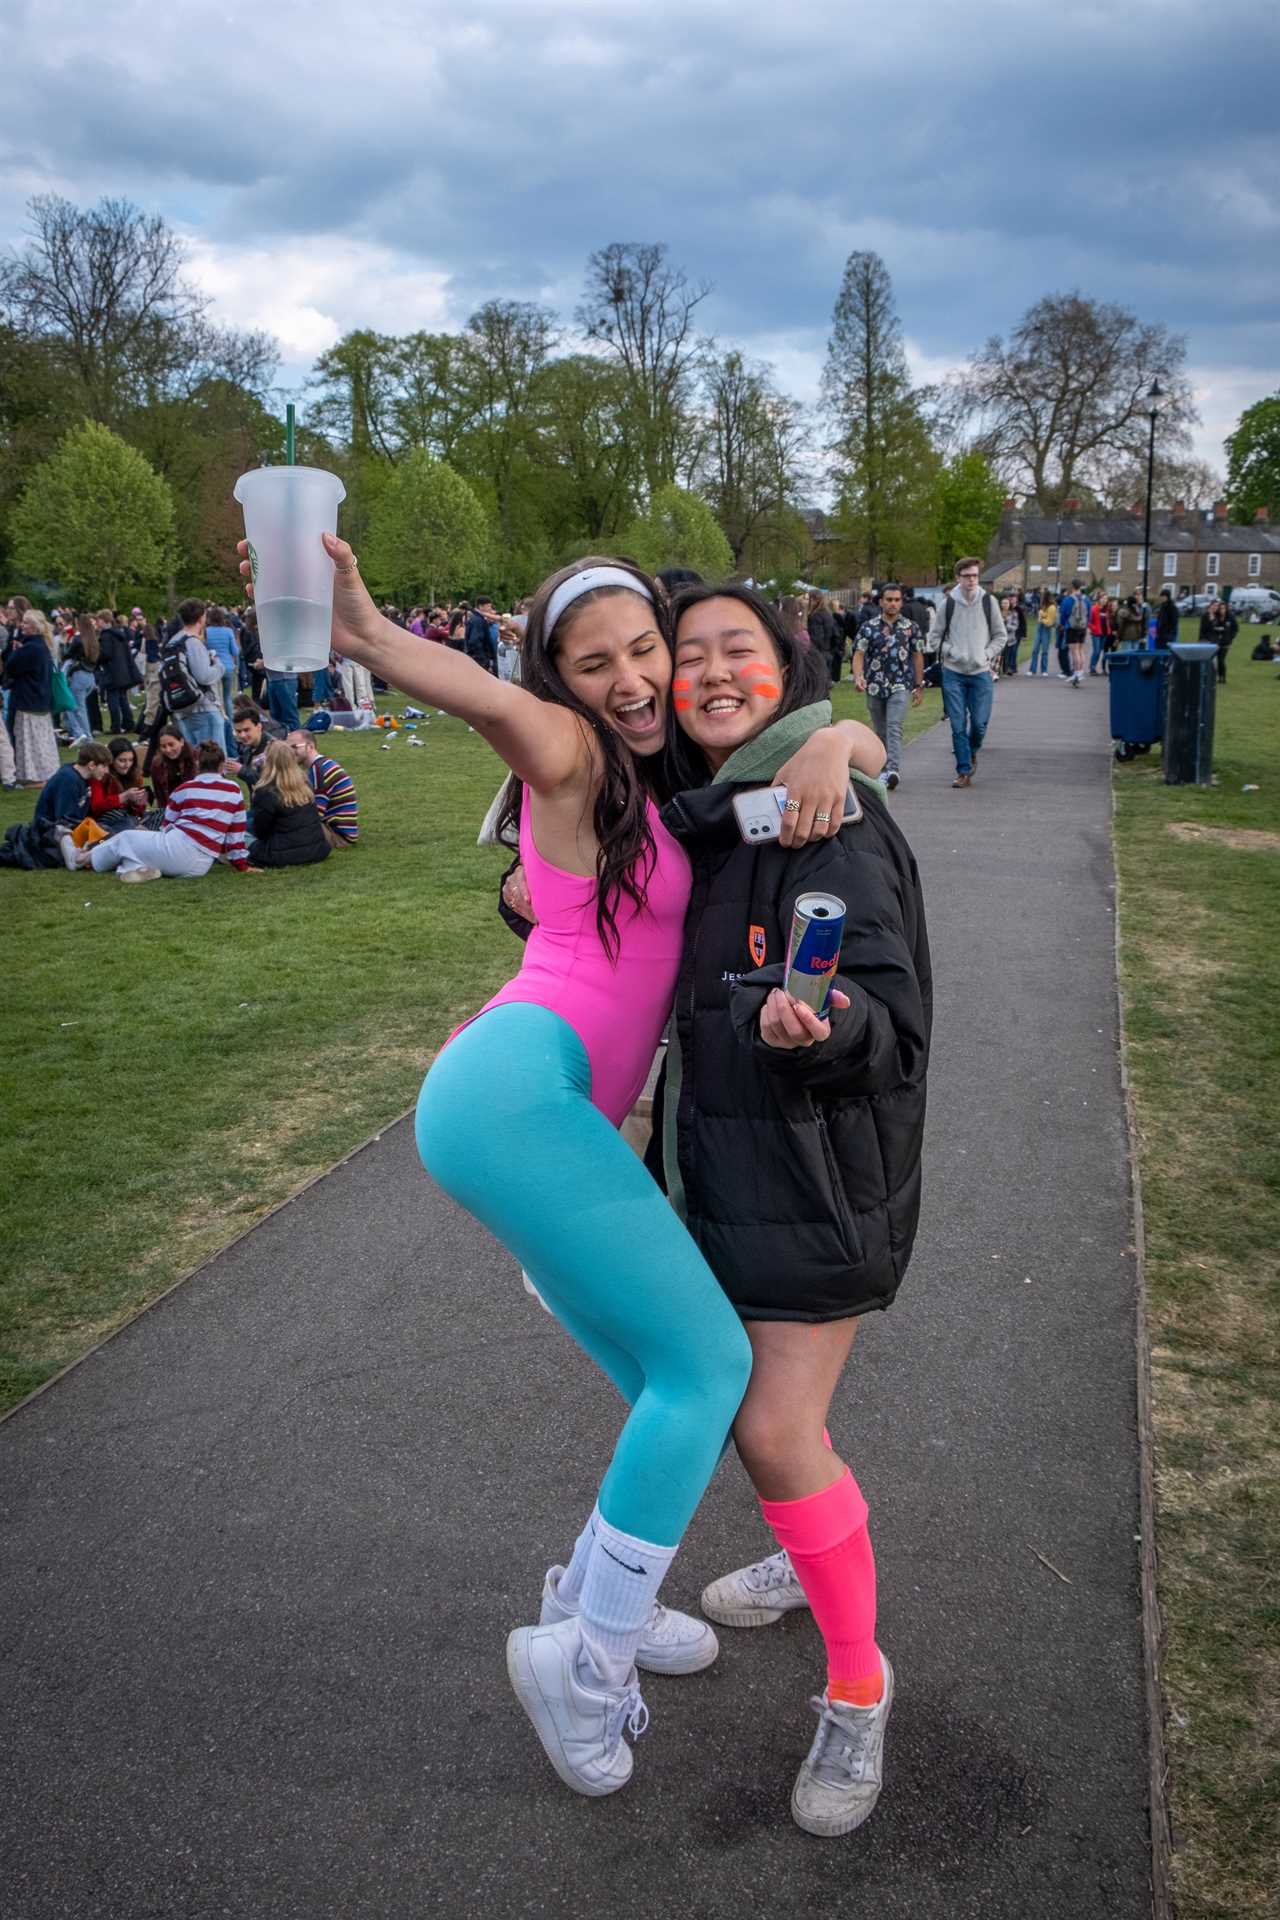 Brits hit the town to make the most of the first long weekend since pubs reopened